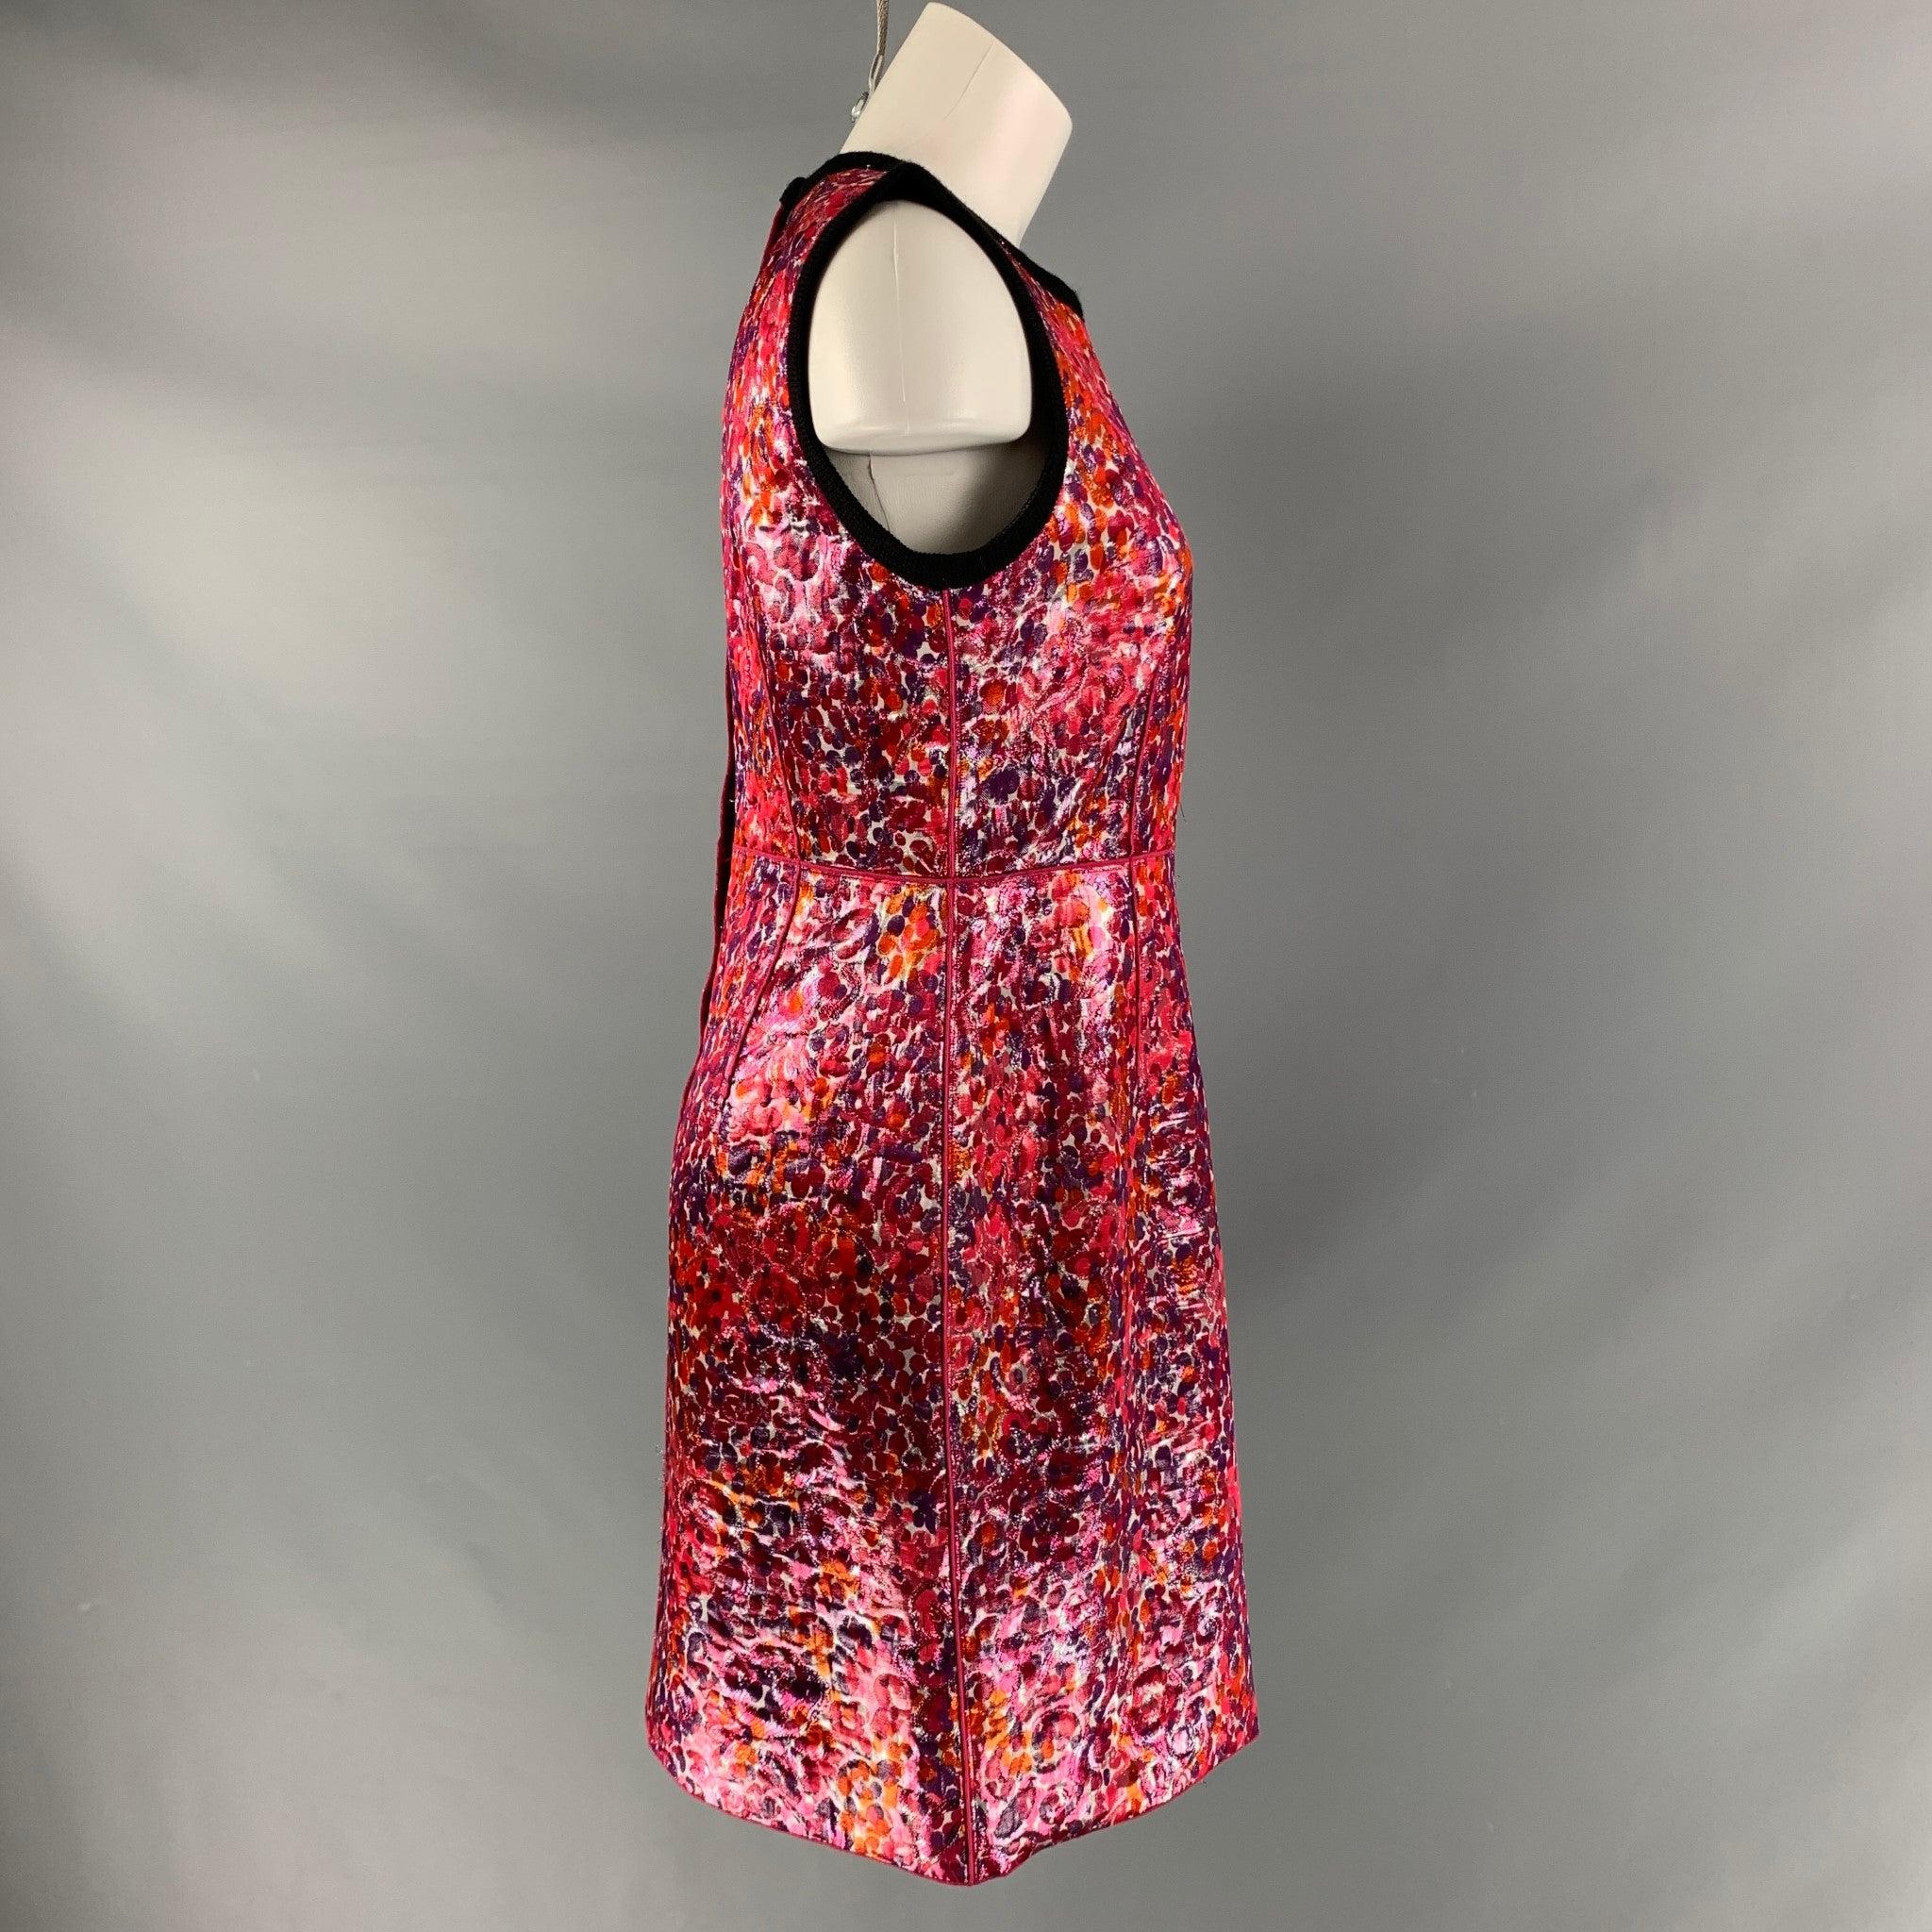 MARC JACOBS BERGDORF GOODMAN dress comes in a multi-color acetate blend featuring floral jacquard, sleeveless, and a back zip up closure. Made in USA.Excellent Pre-Owned Condition. 

Marked:   6 

Measurements: 
 
Shoulder: 15 inches Bust: 34 inches